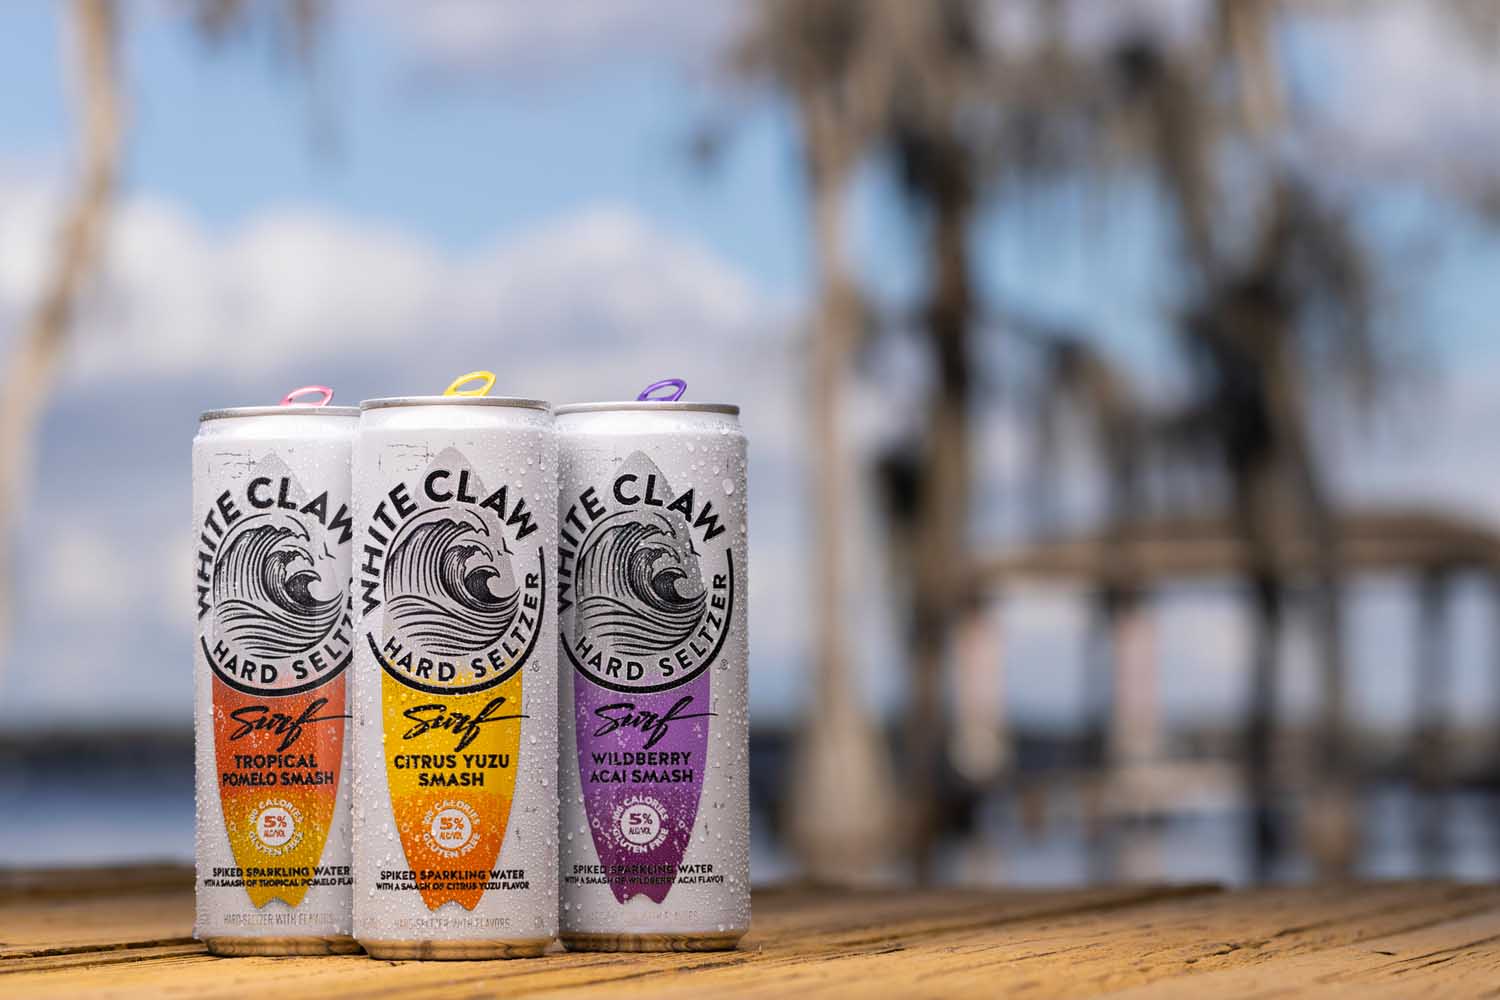 Three cans of White Claw Surf on a beach.